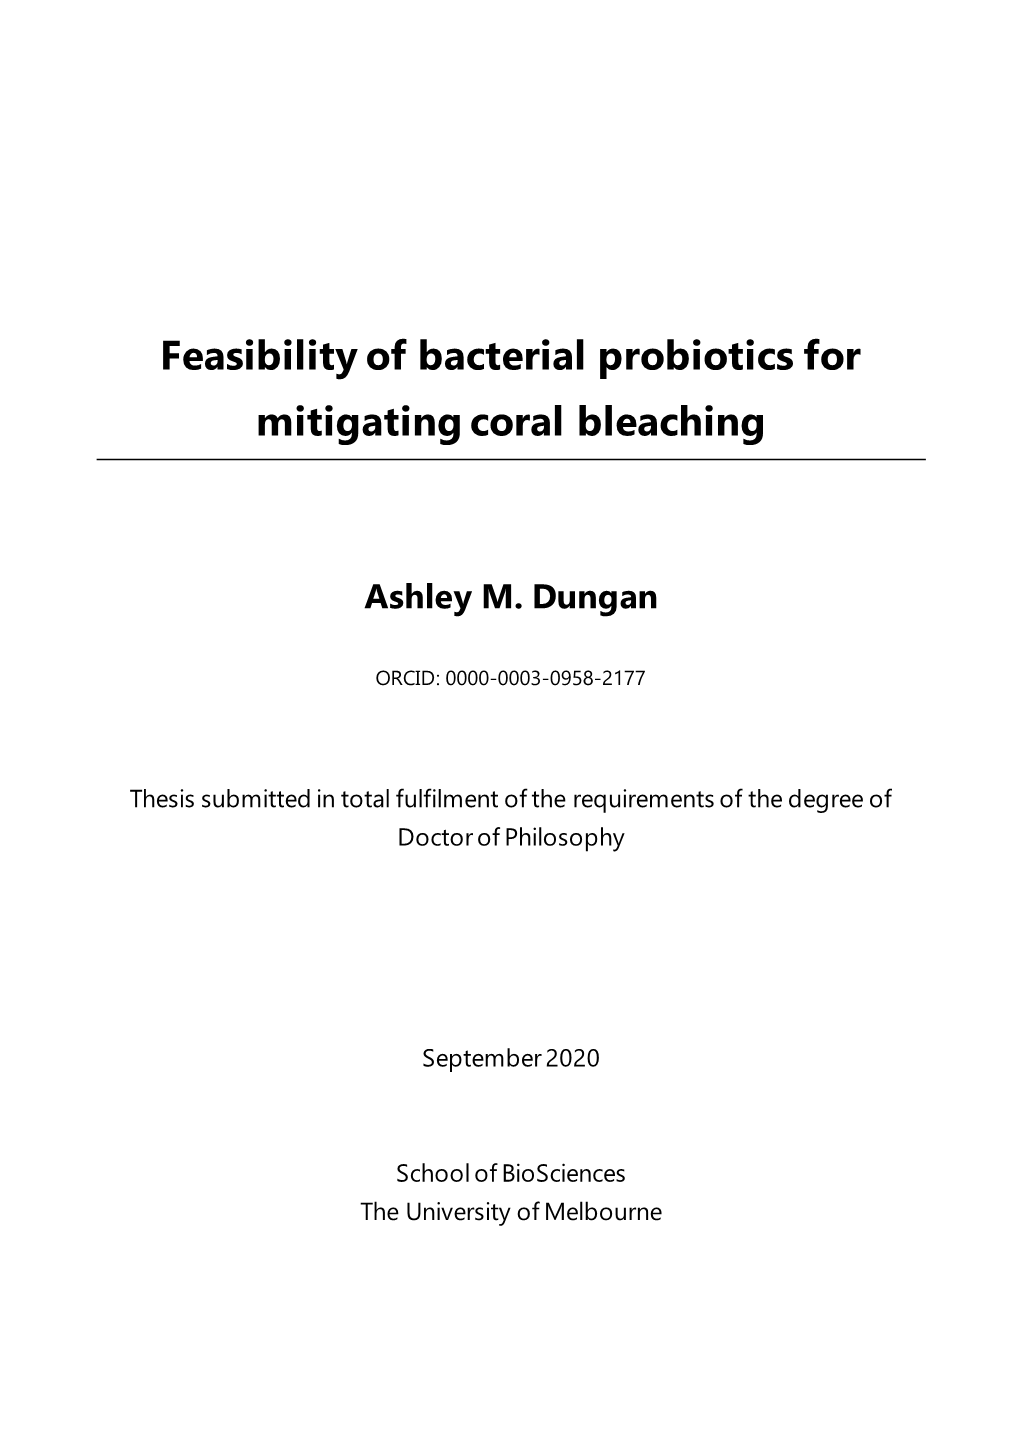 Feasibility of Bacterial Probiotics for Mitigating Coral Bleaching